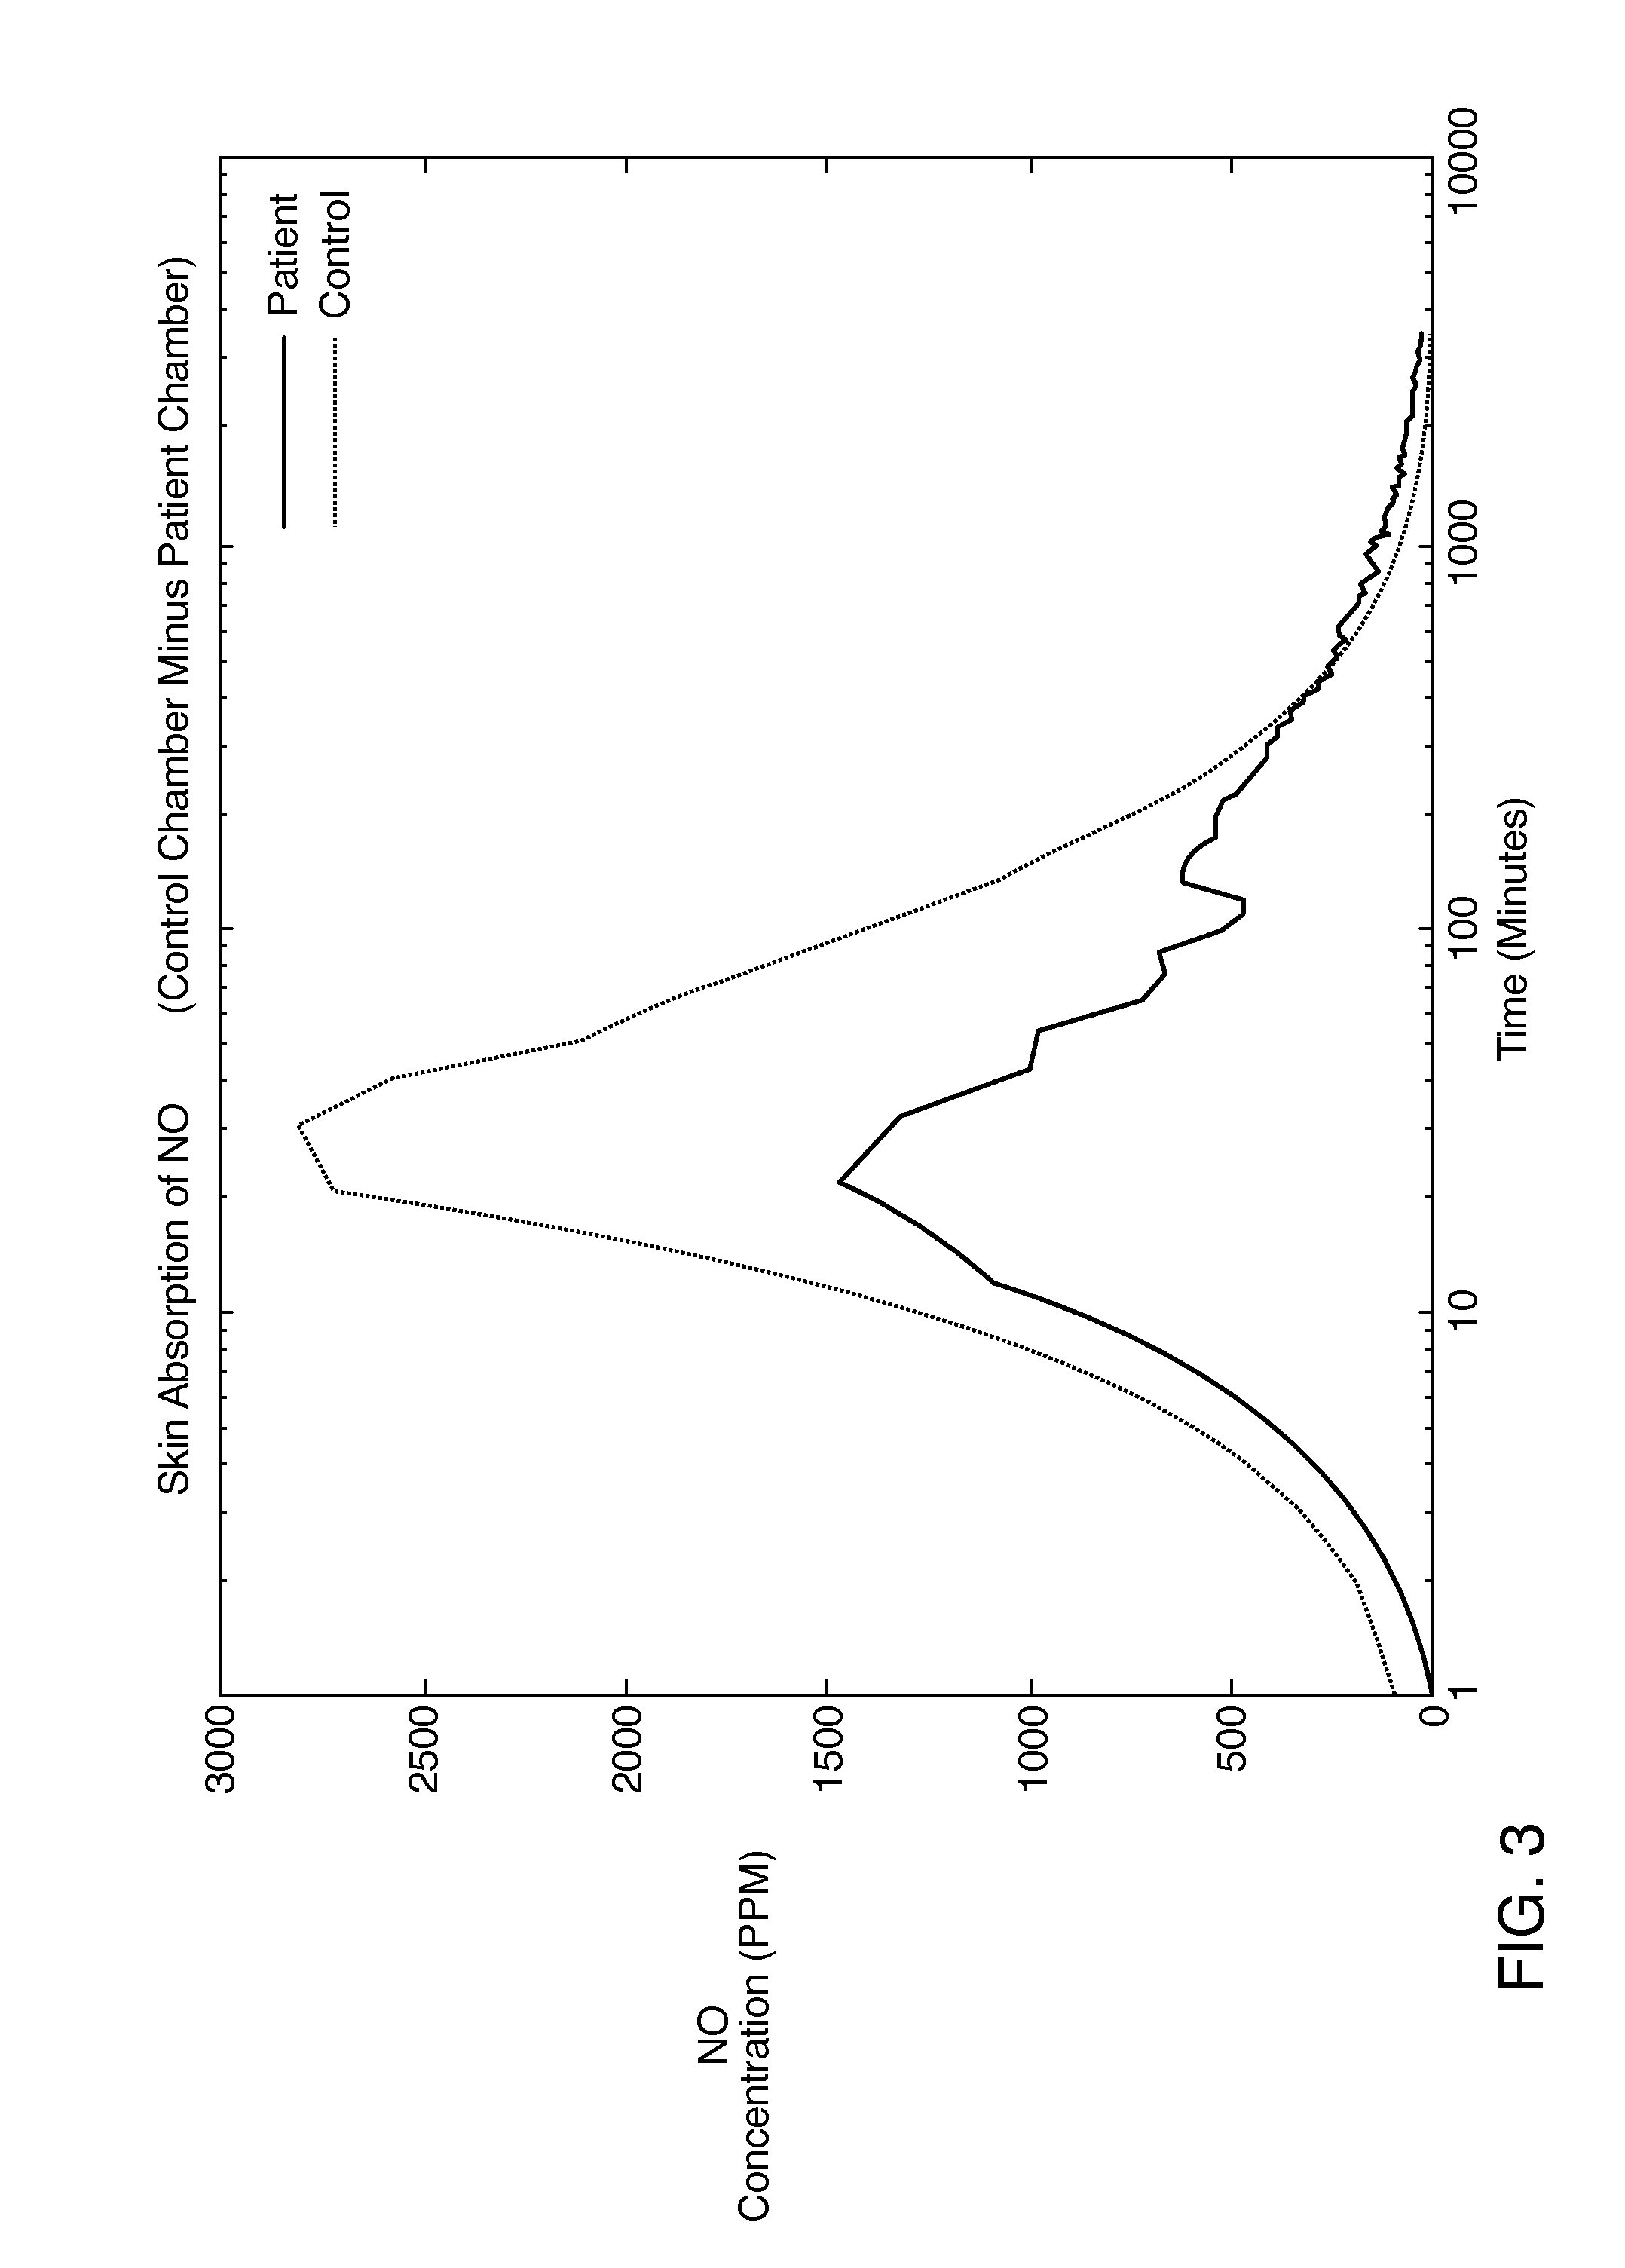 Deep topical systemic nitric oxide therapy apparatus and method